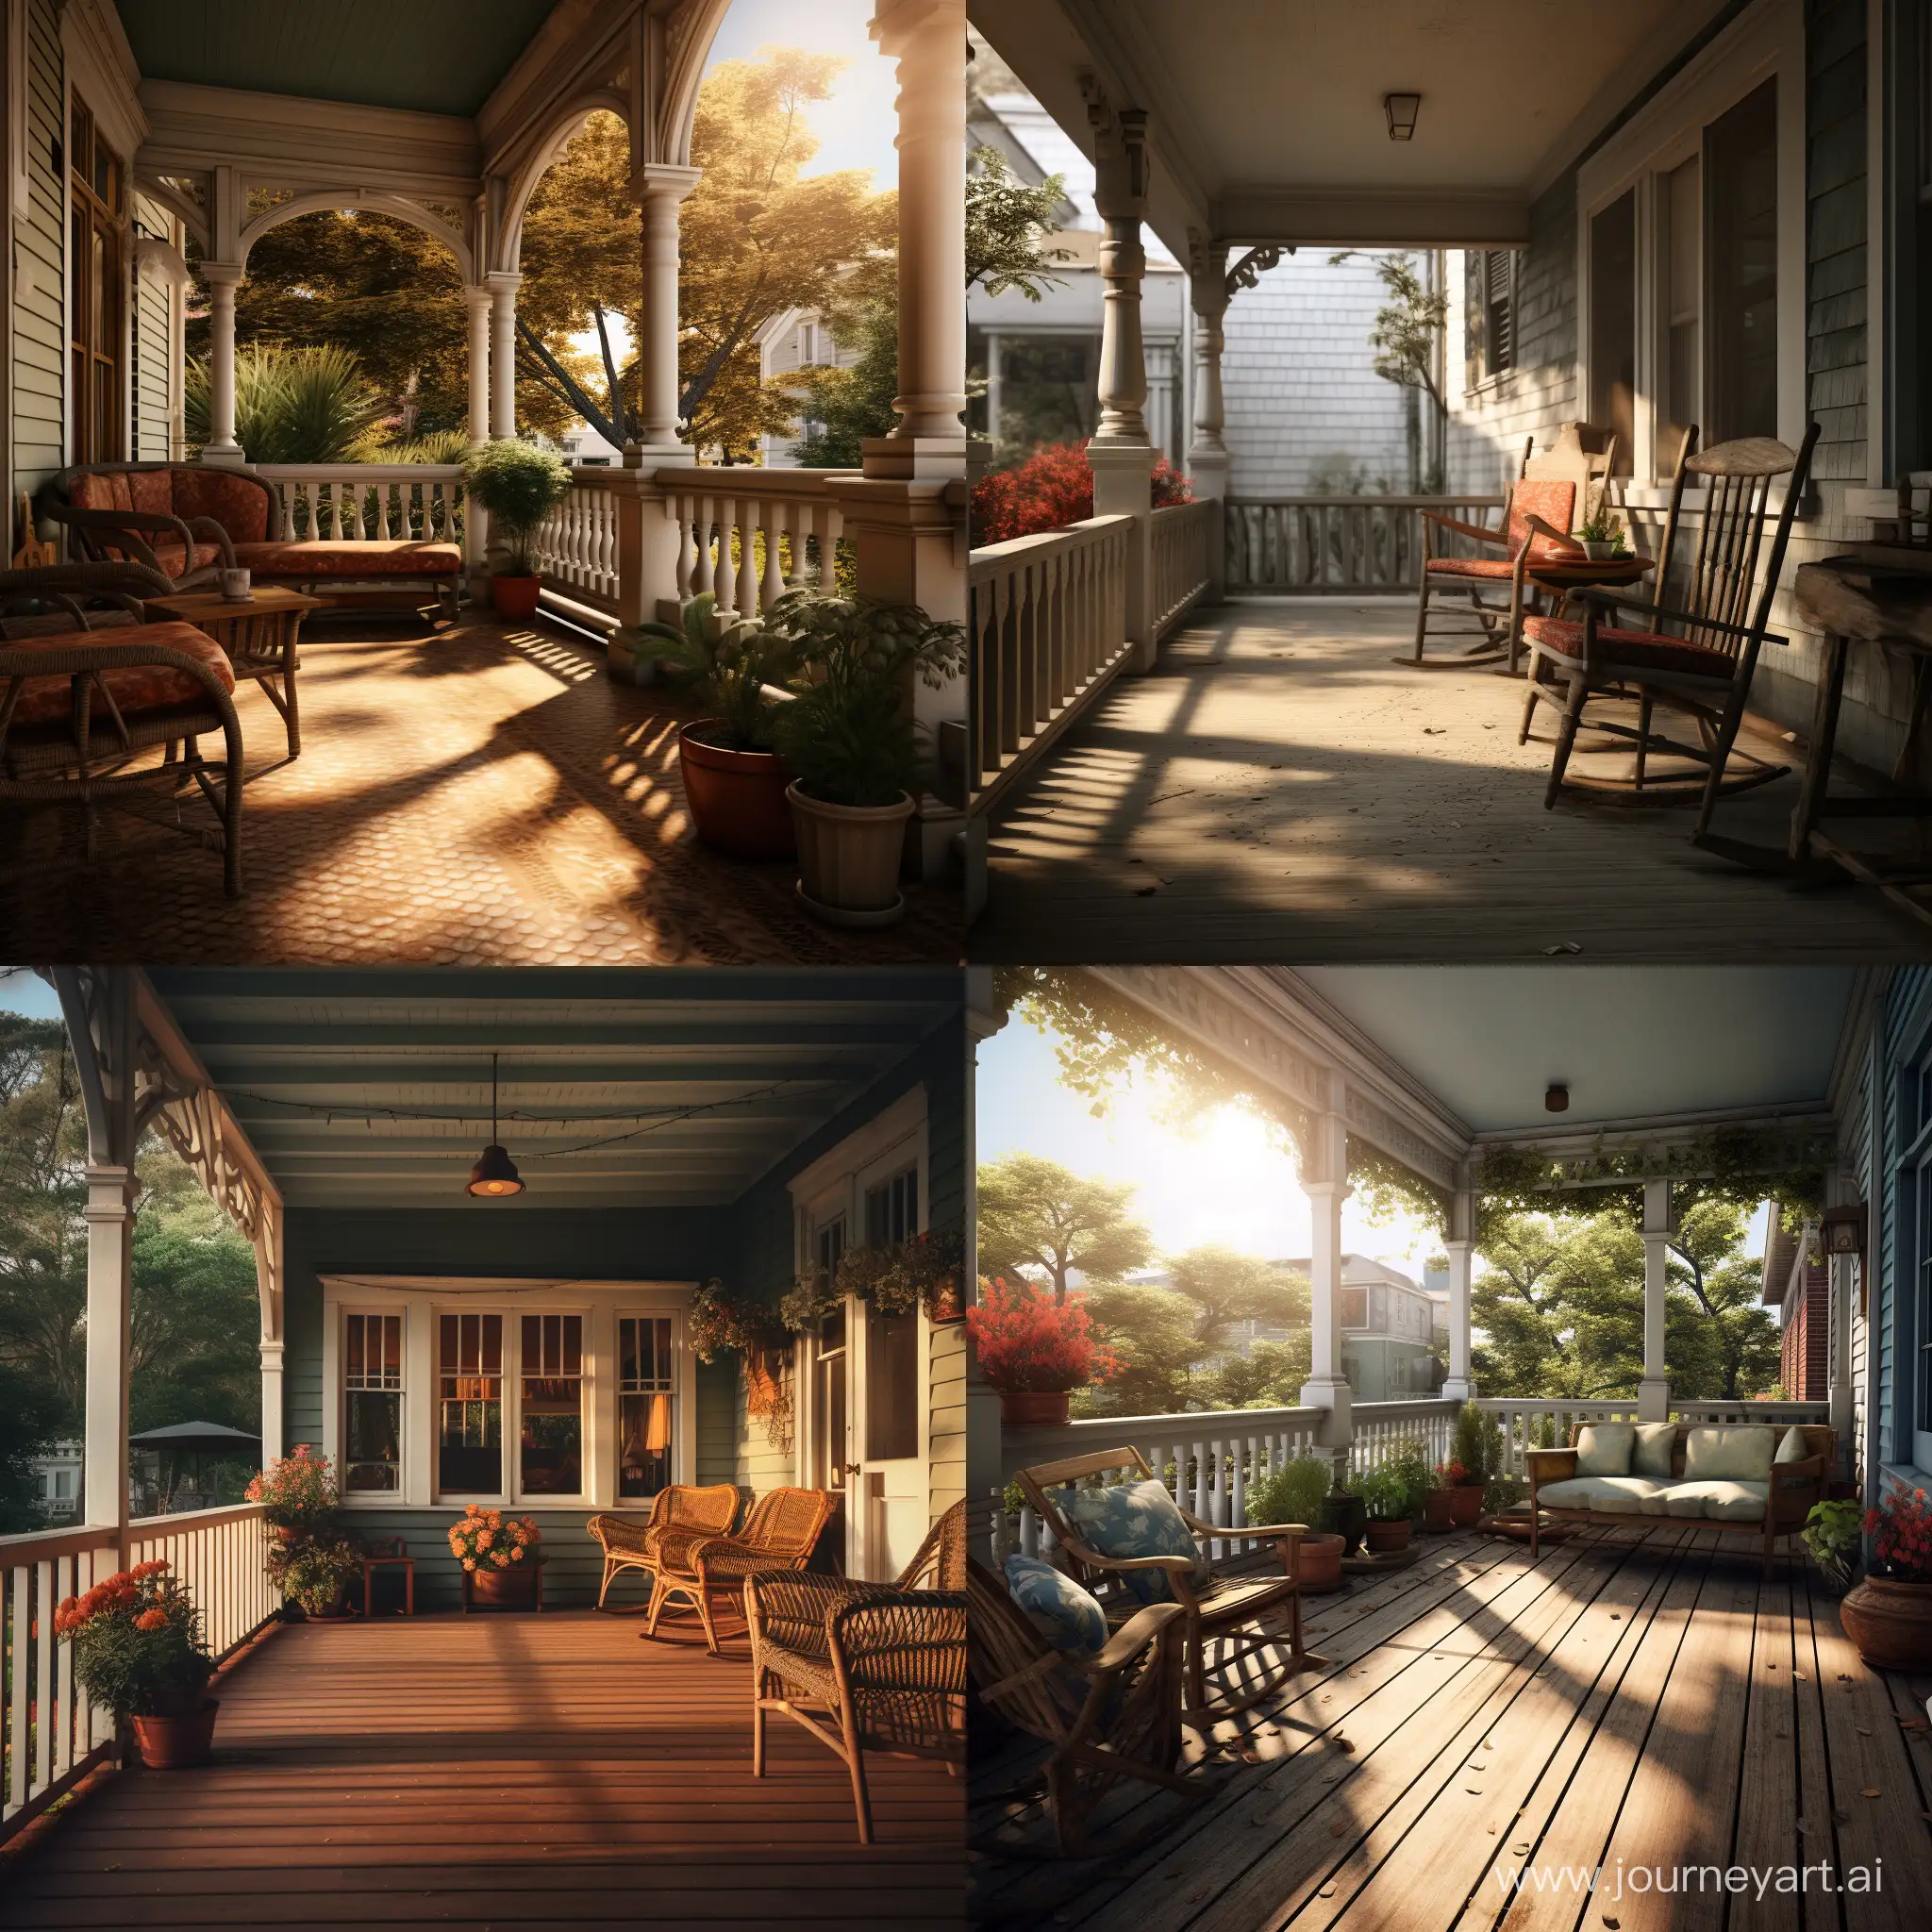 Cozy-Porch-with-Blooming-Flowers-and-Welcoming-Chairs